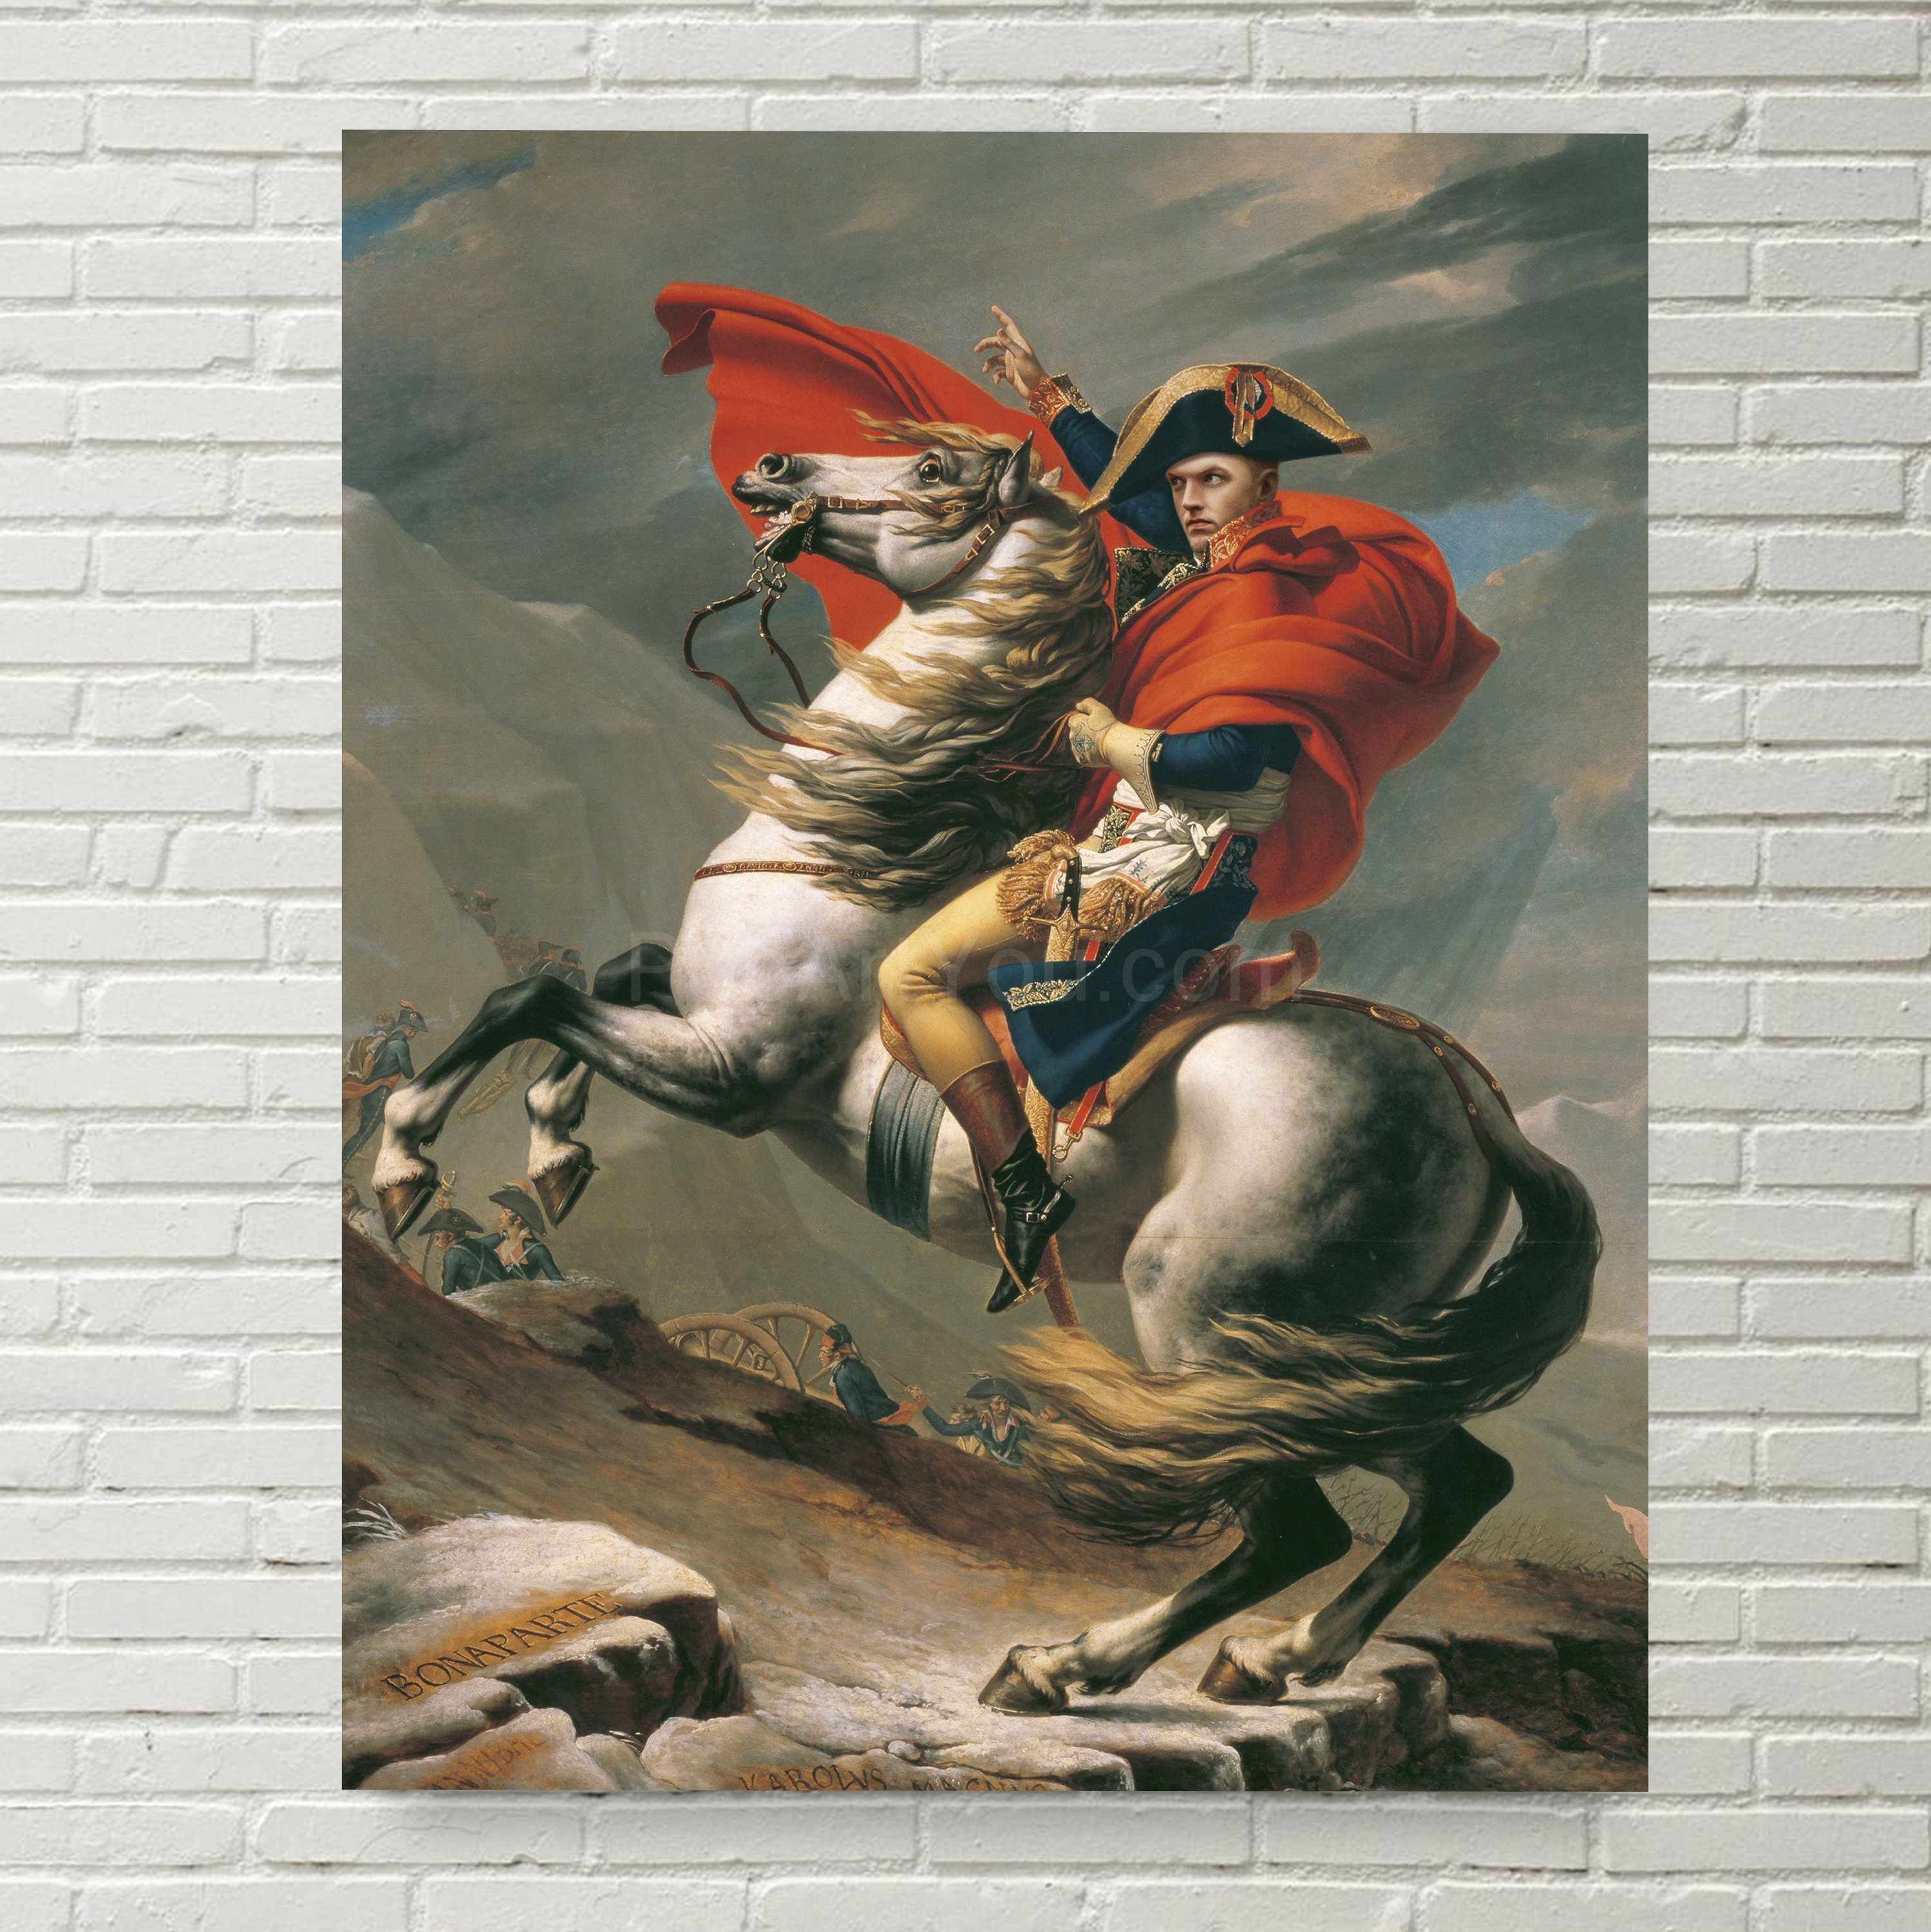 A portrait of a man dressed in historical royal clothes riding a white horse hangs on a white brick wall